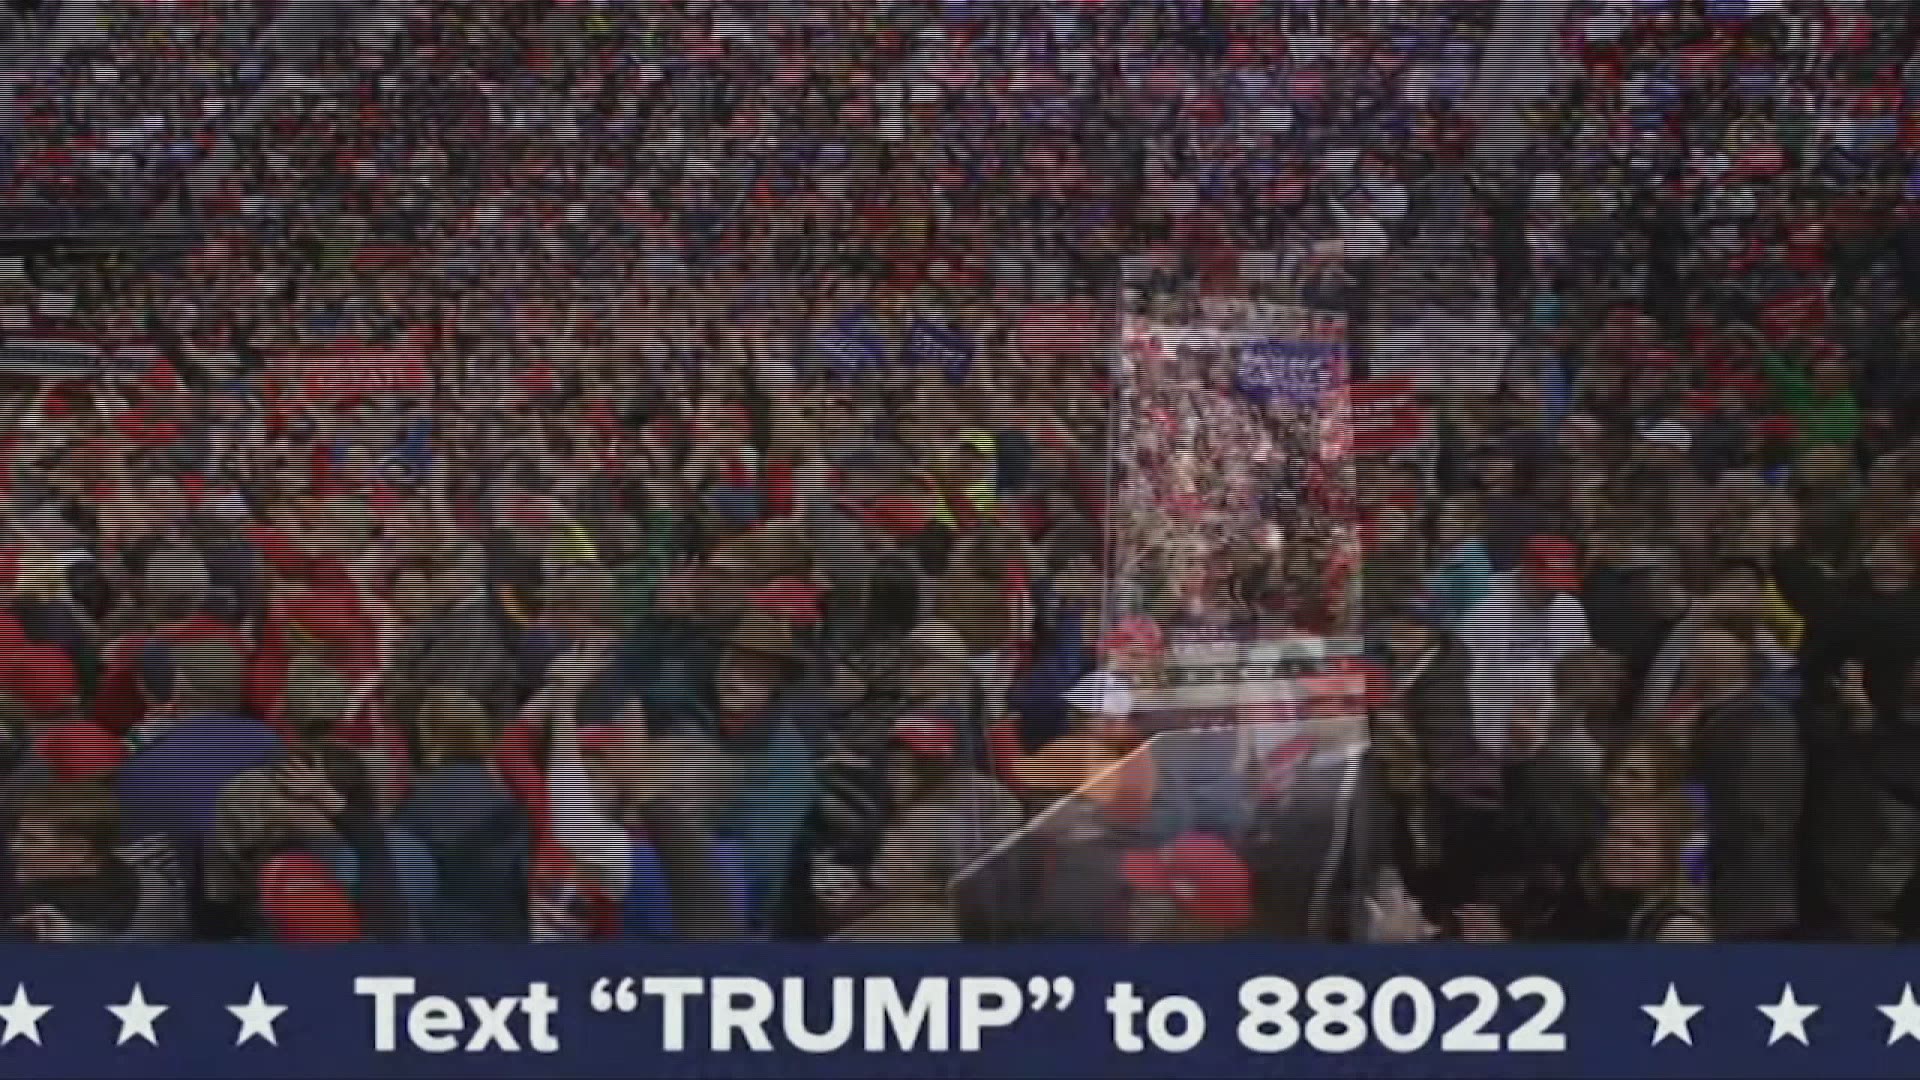 The ad includes supporters at his rallies with his voice from speeches playing under video, promising to "Make America Great Again."